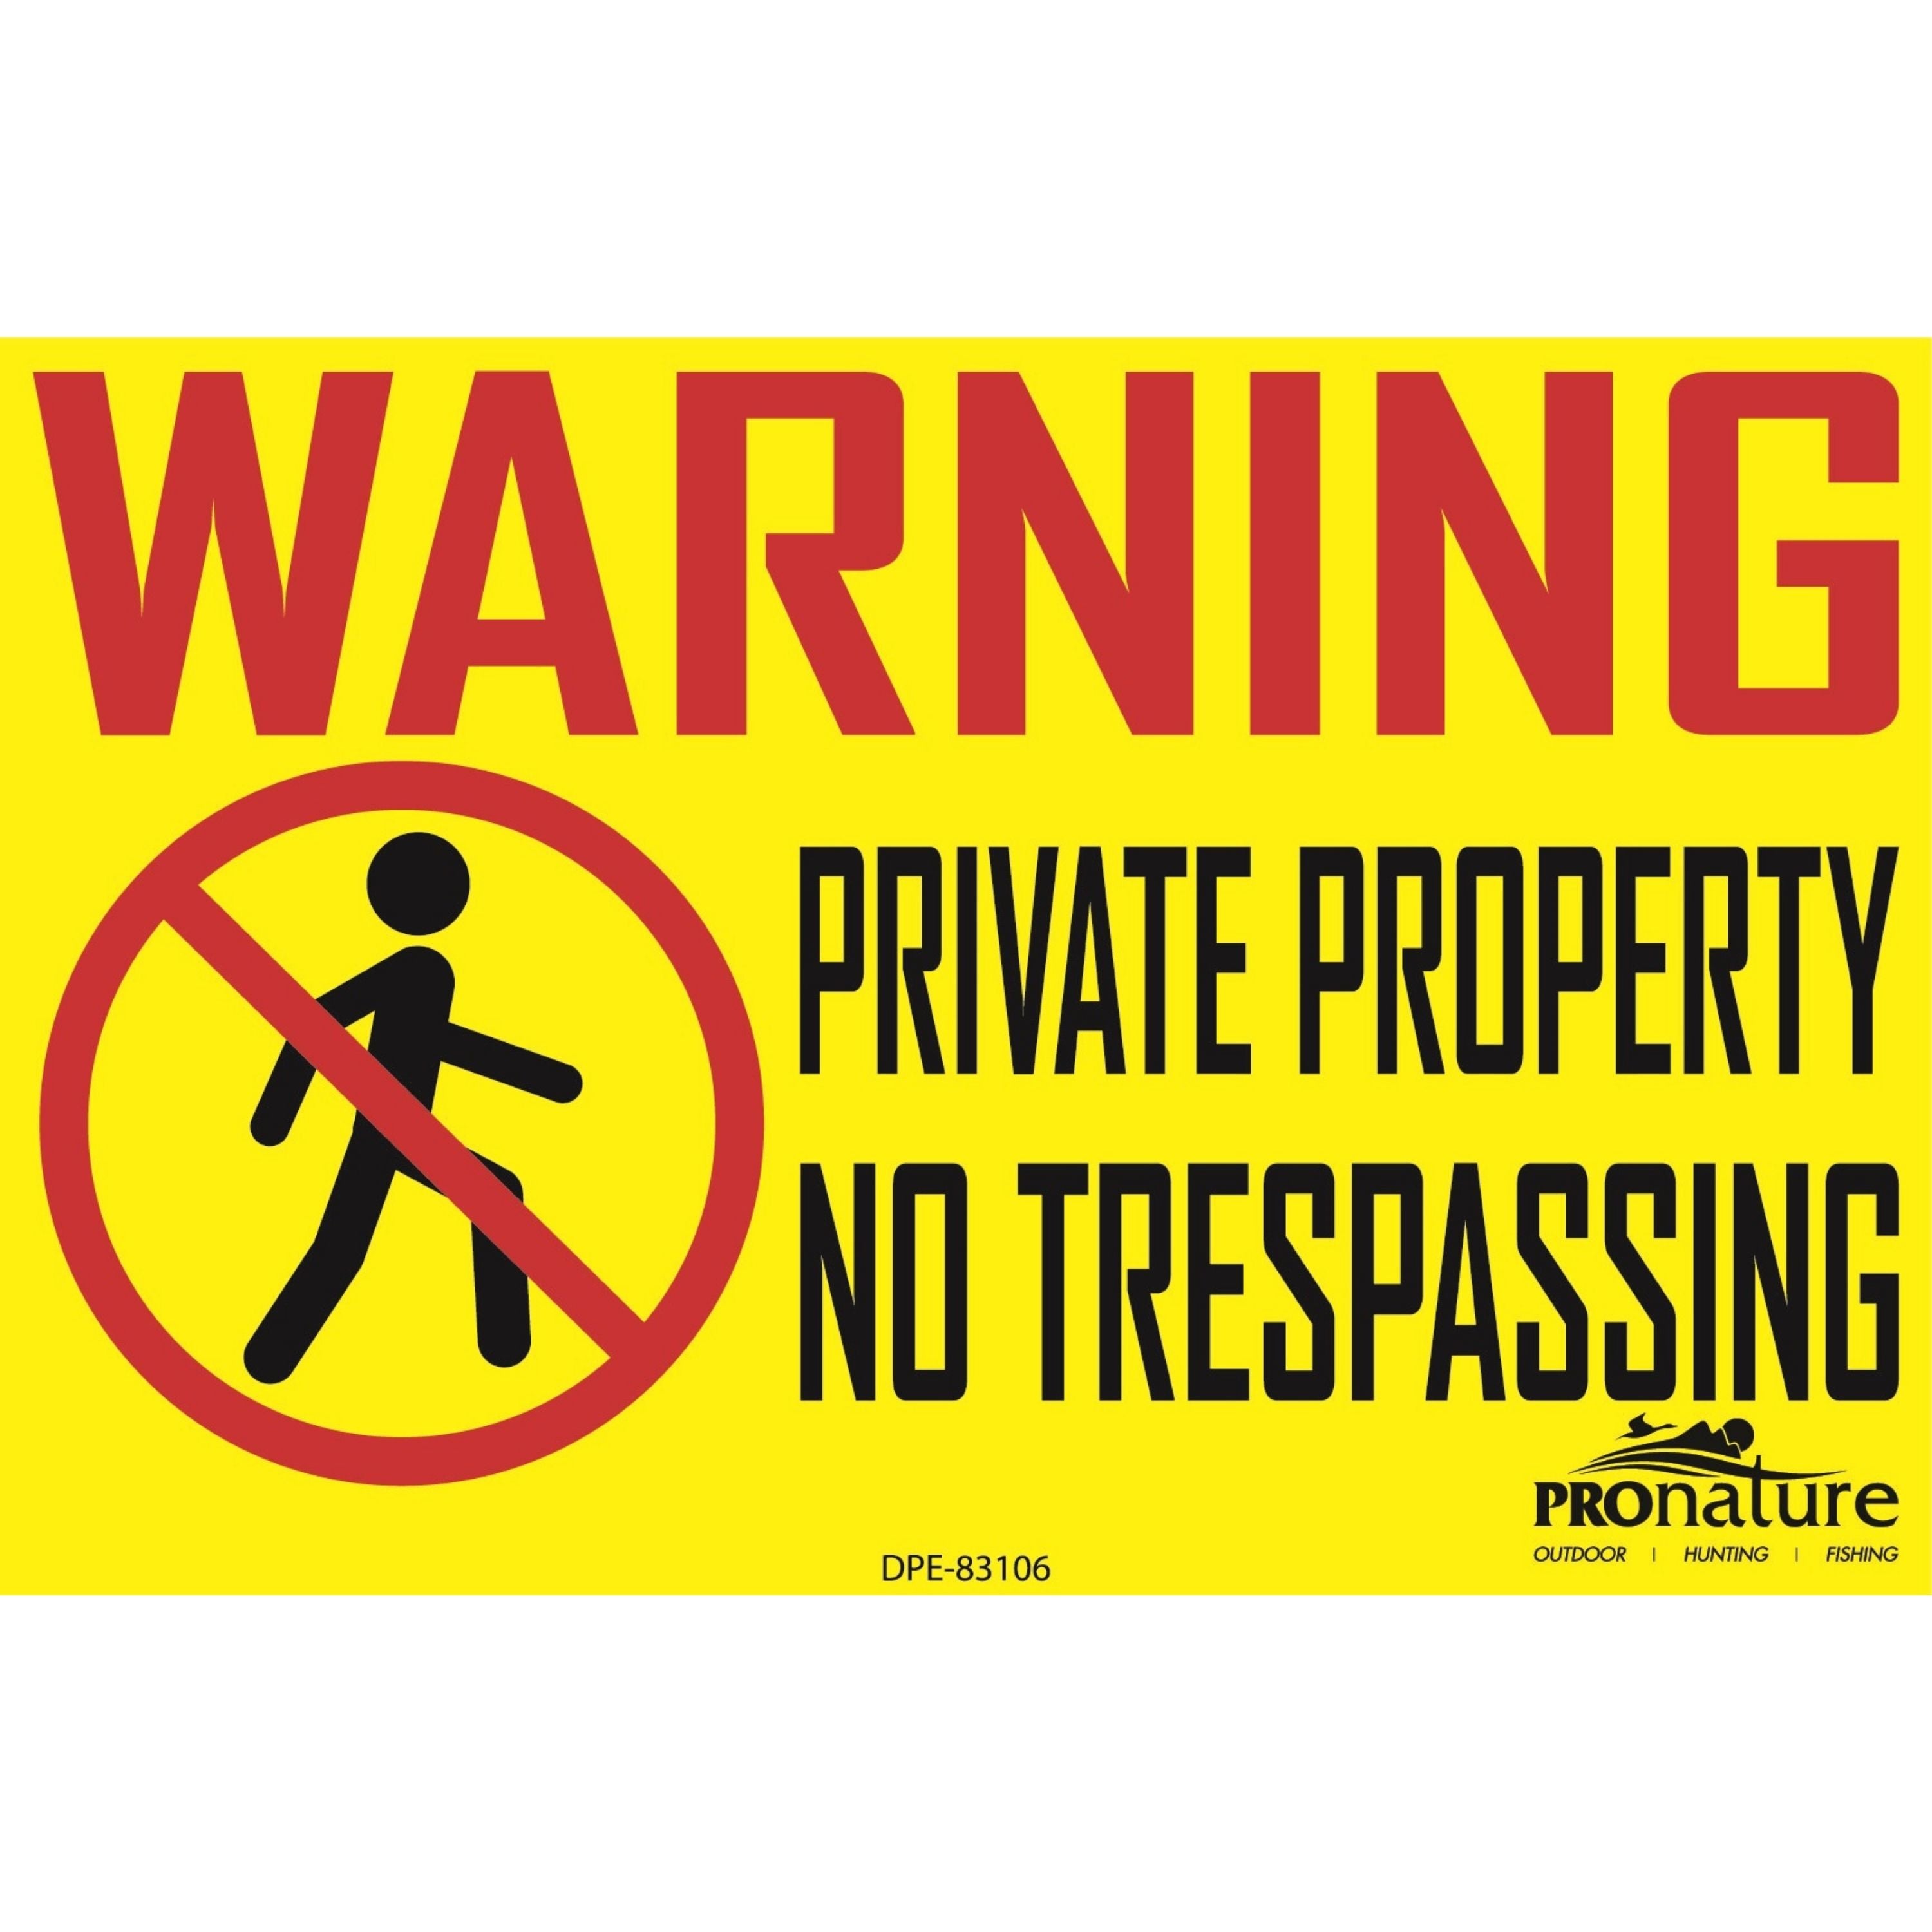 Affiche “Warning , private property”||“Warning private property” sign